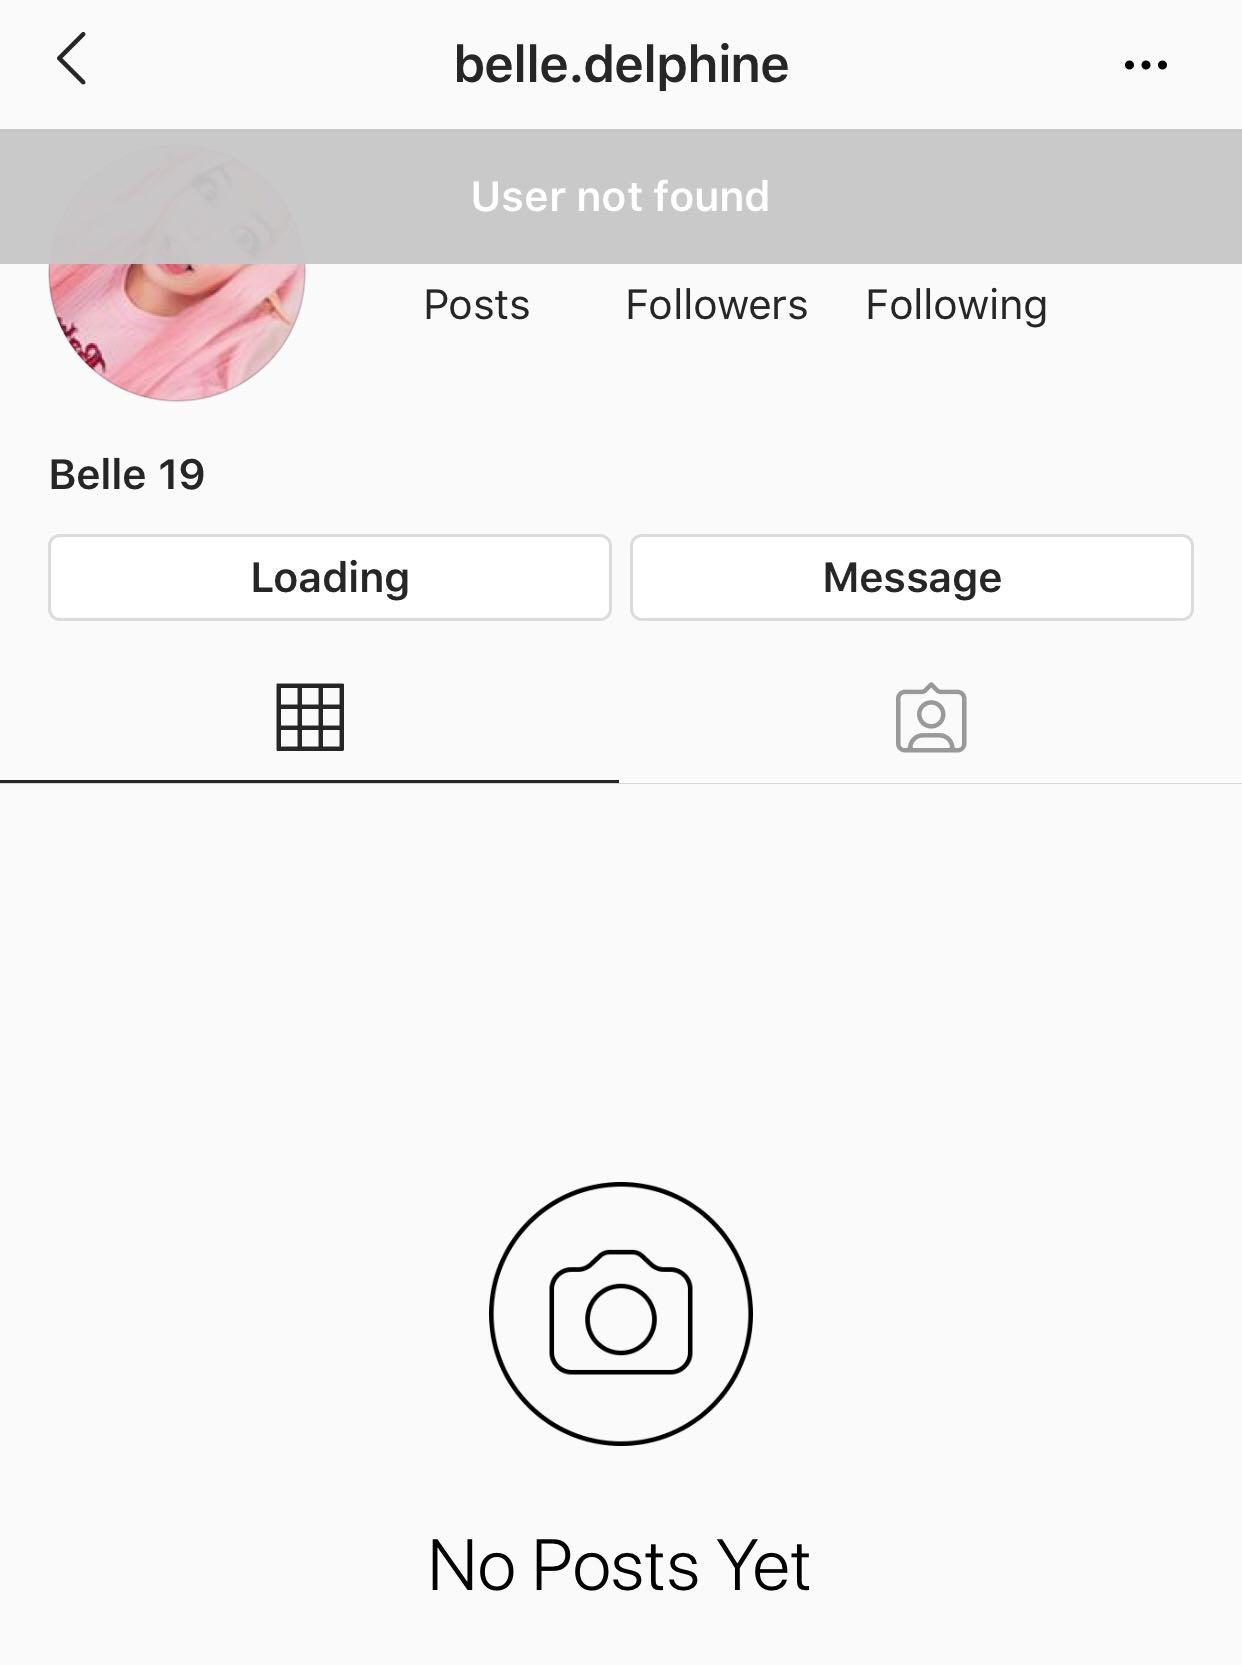 Belle Delphine Instagram ban is technical issue, new account